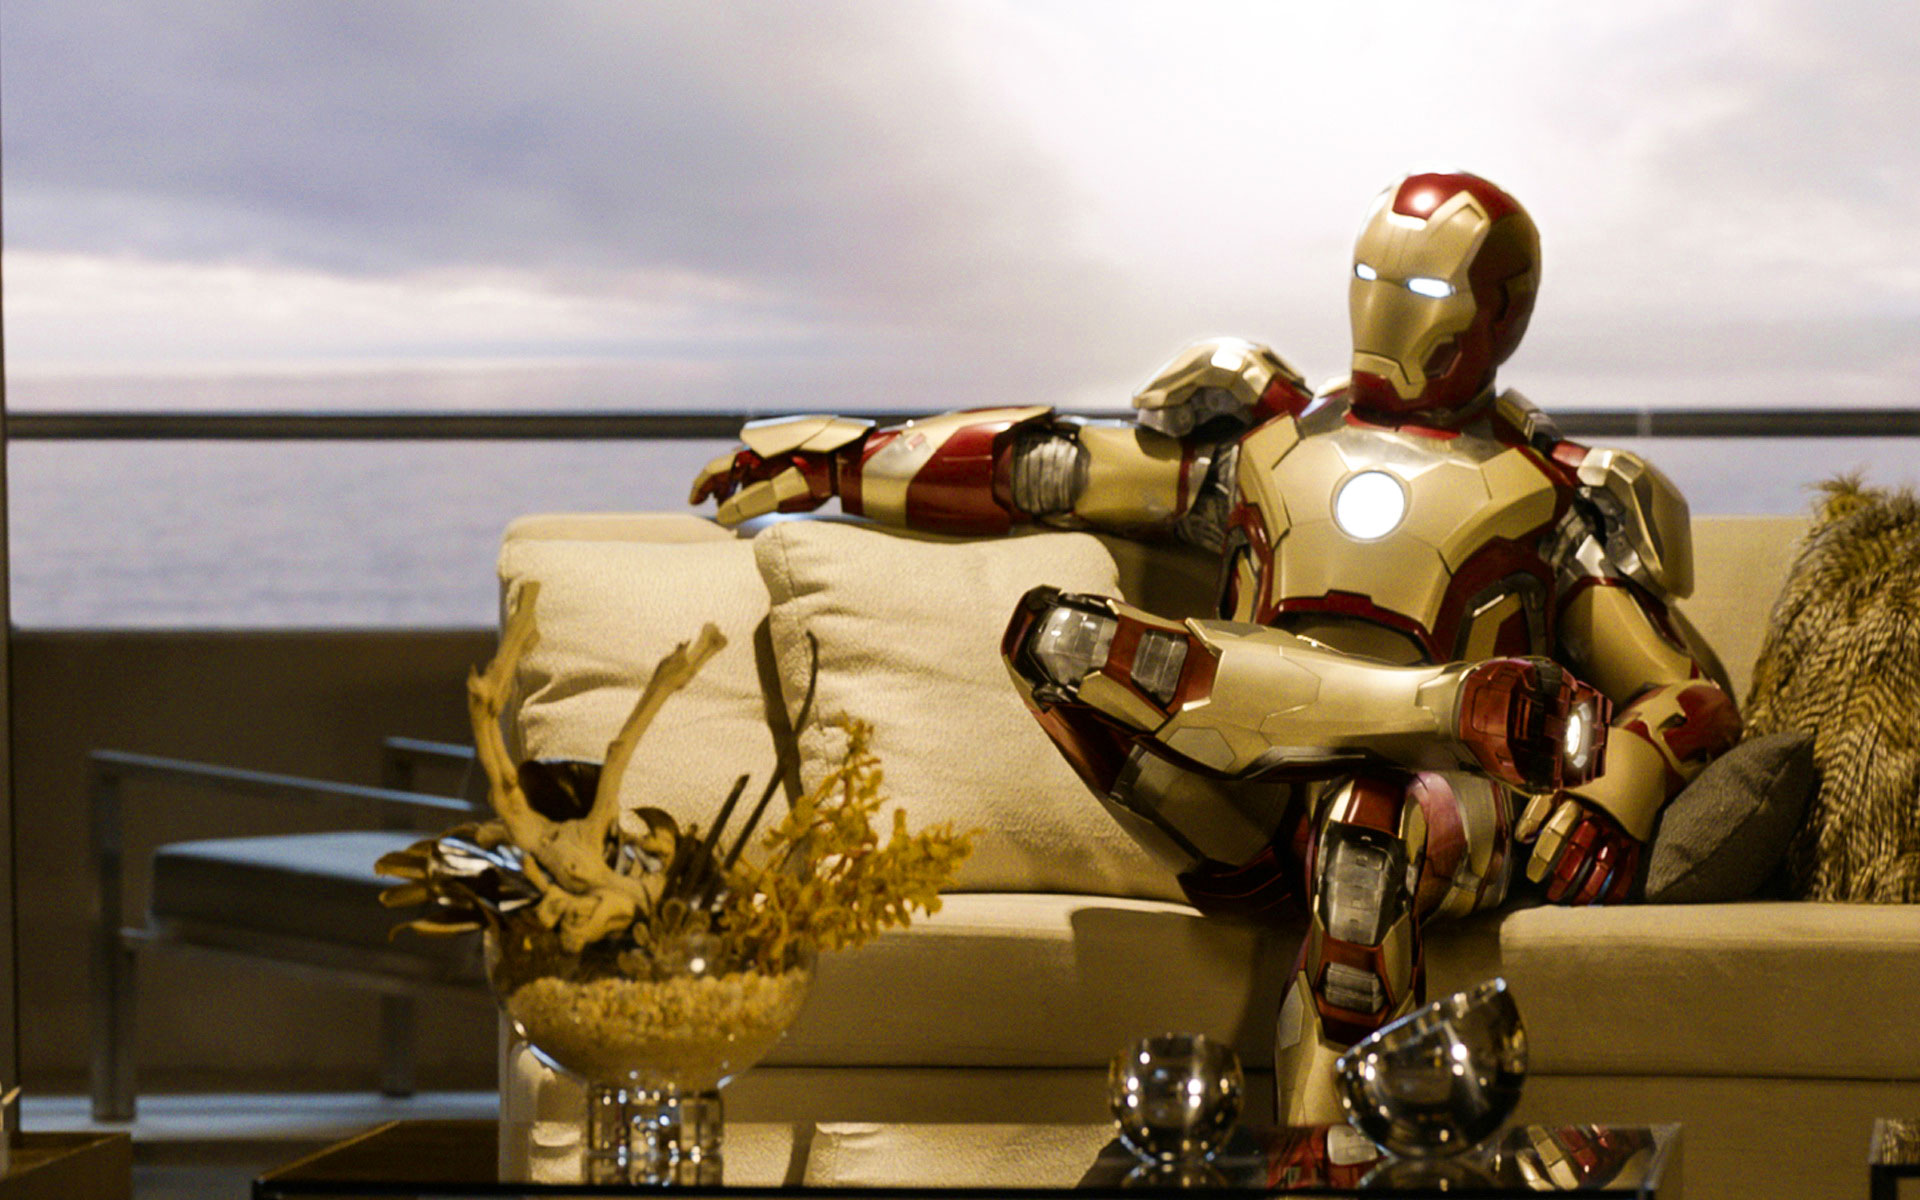 Iron Man Hd Wallpapers In Hd Space Elephant